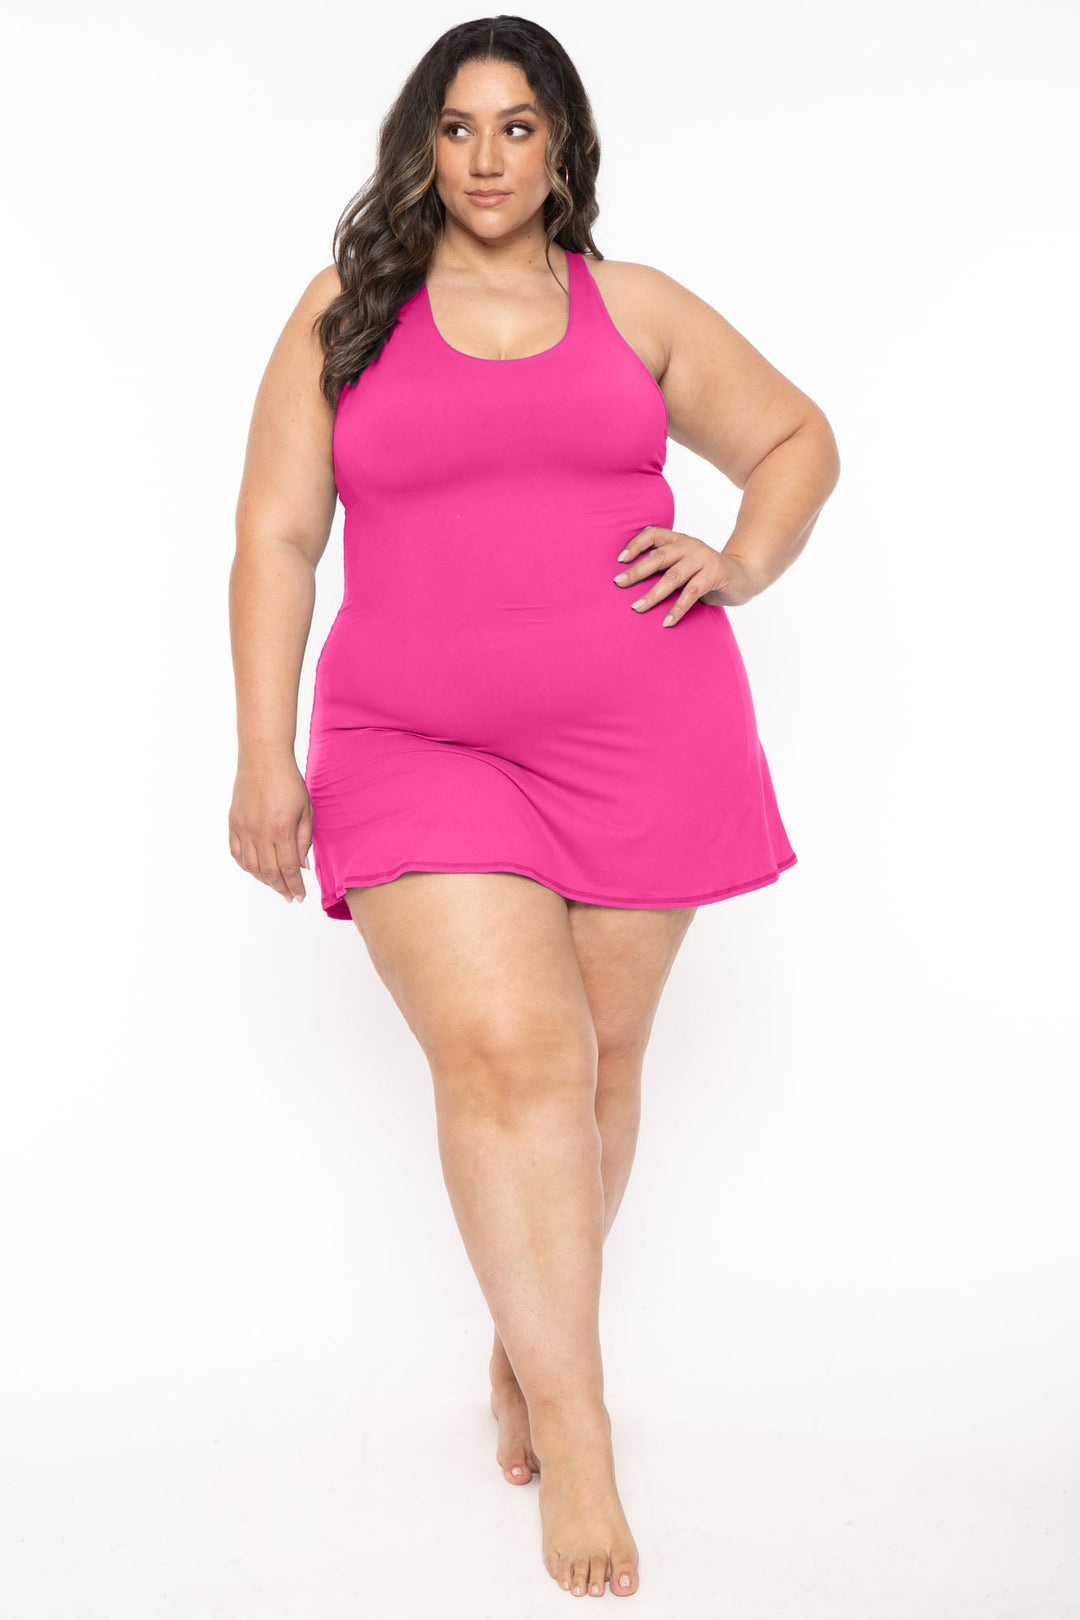 RAE MODE ACTIVEWEAR 1X / Pink Plus Size Lizzy  Active Romper Dress  - Pink